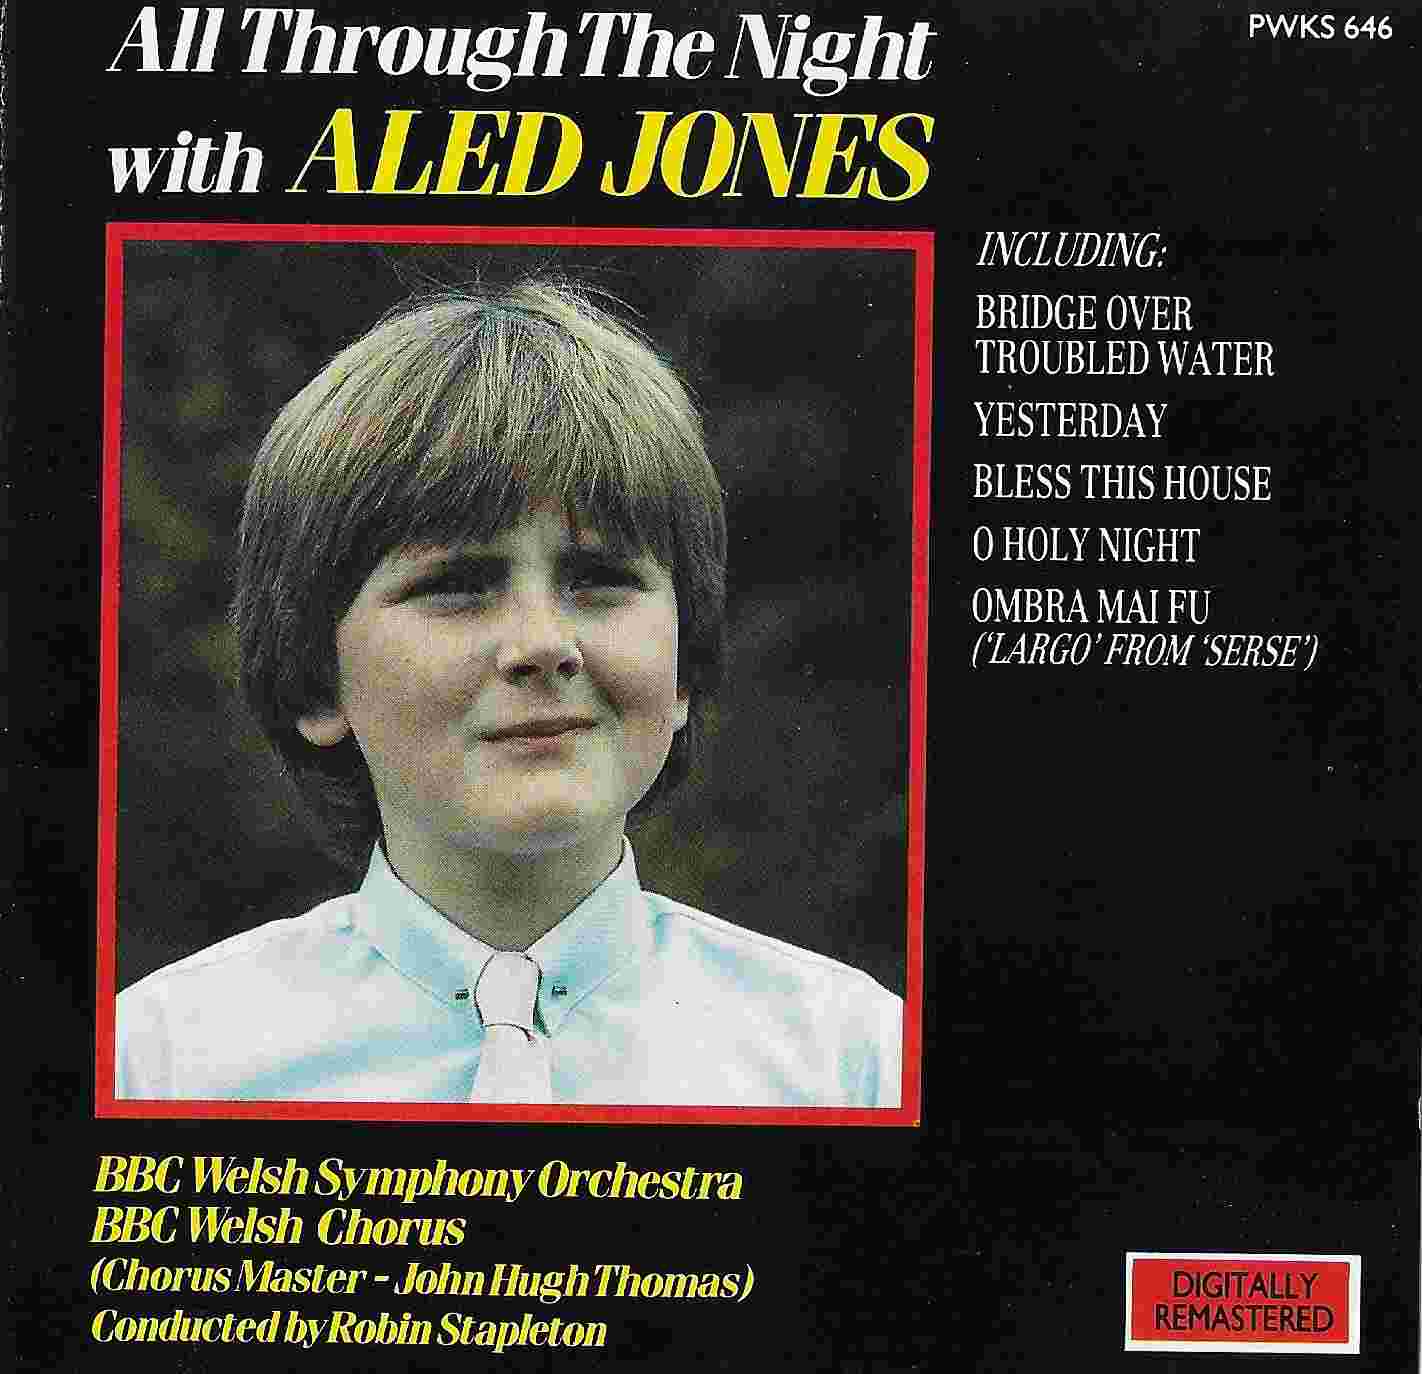 Picture of PWKS 646 All through the night - Aled Jones by artist Aled Jones from the BBC cds - Records and Tapes library